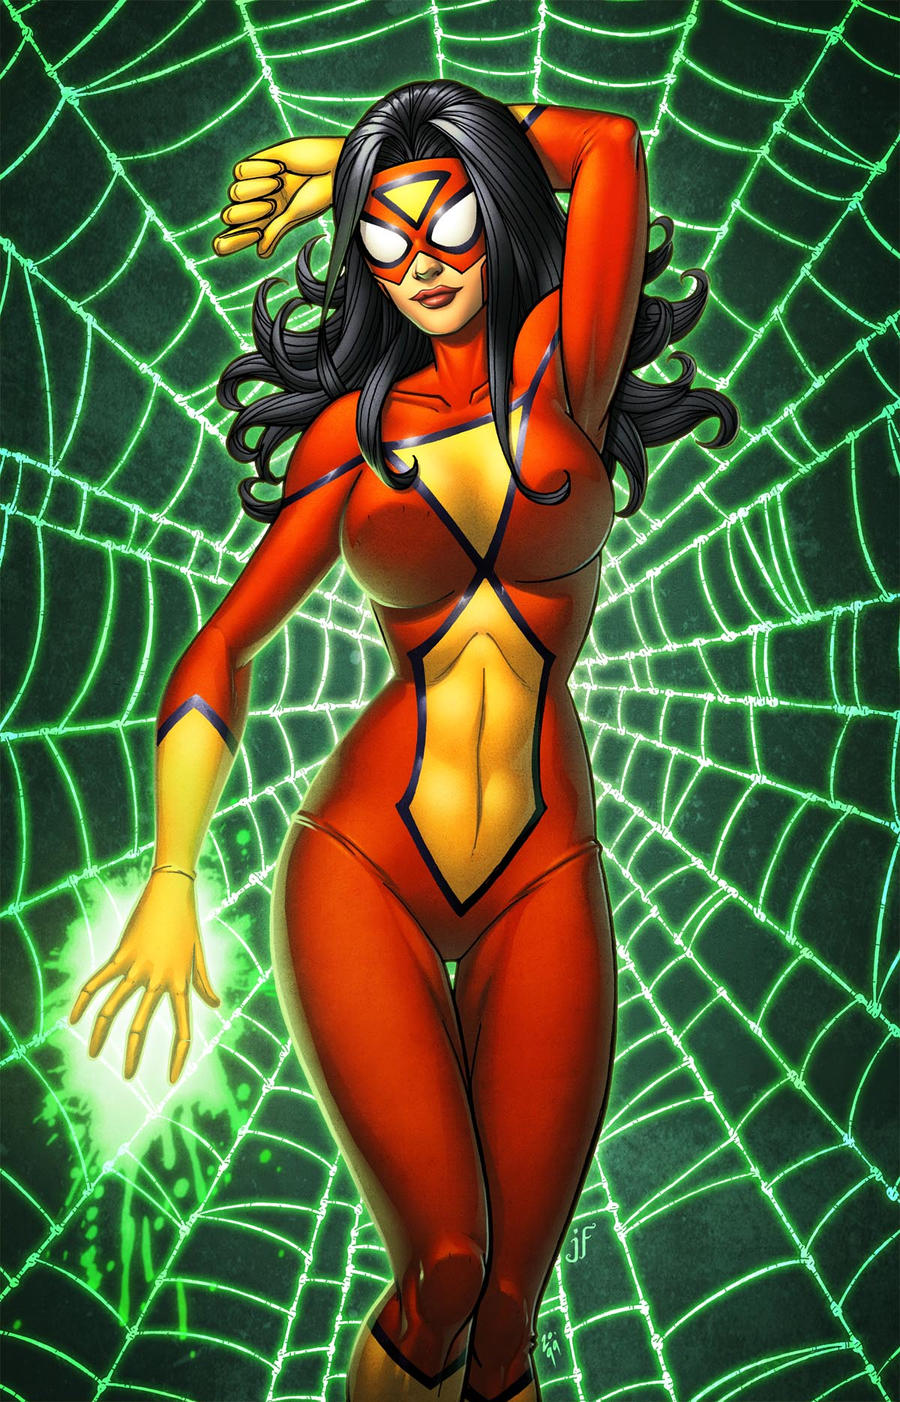 spider_woman___collab_by_windriderx23-d4lu621.jpg